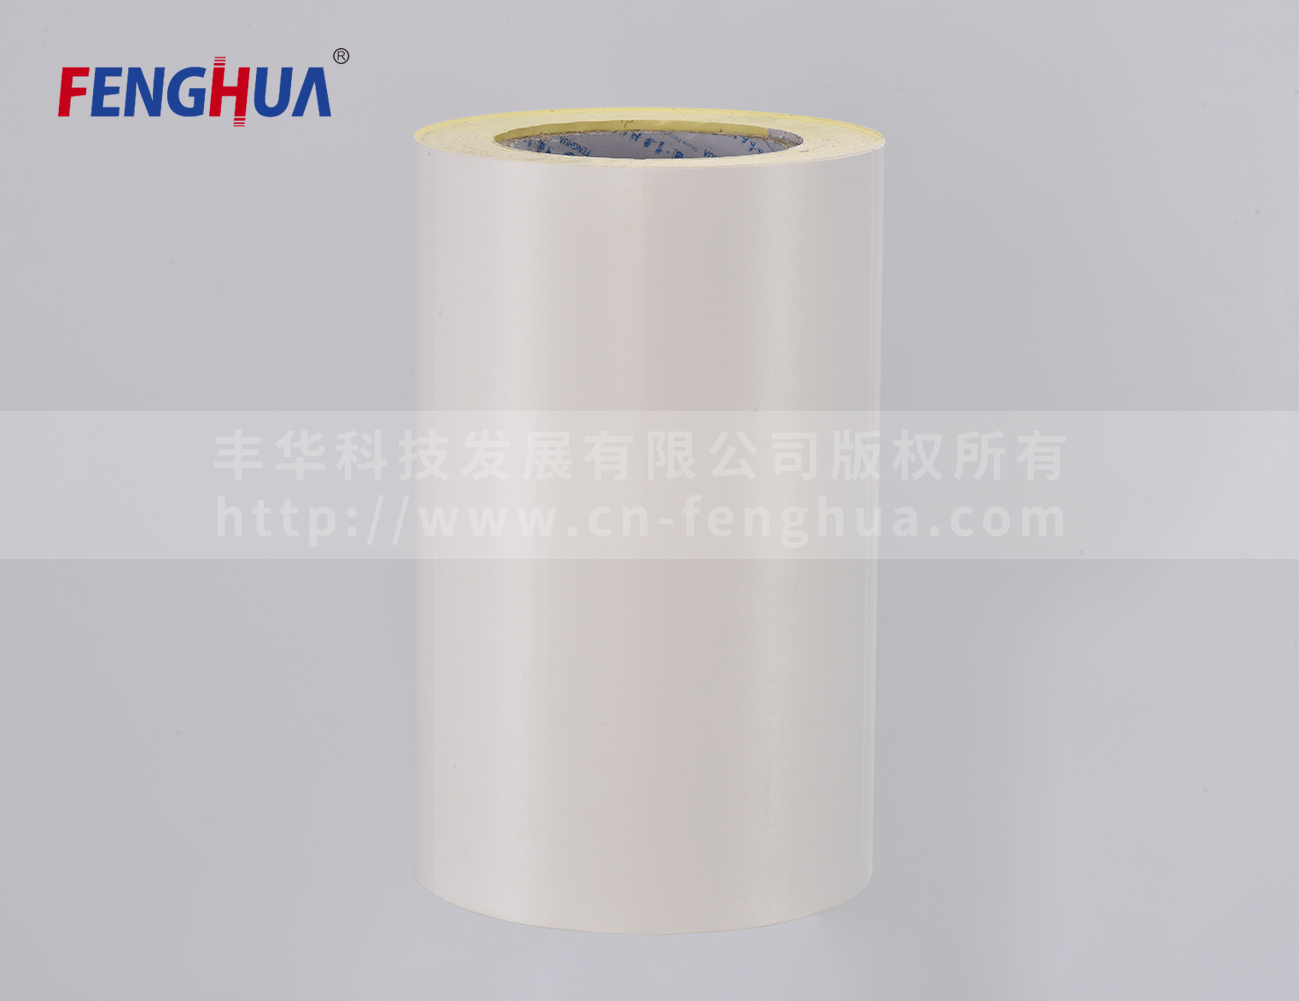 Glossy cast coated paper